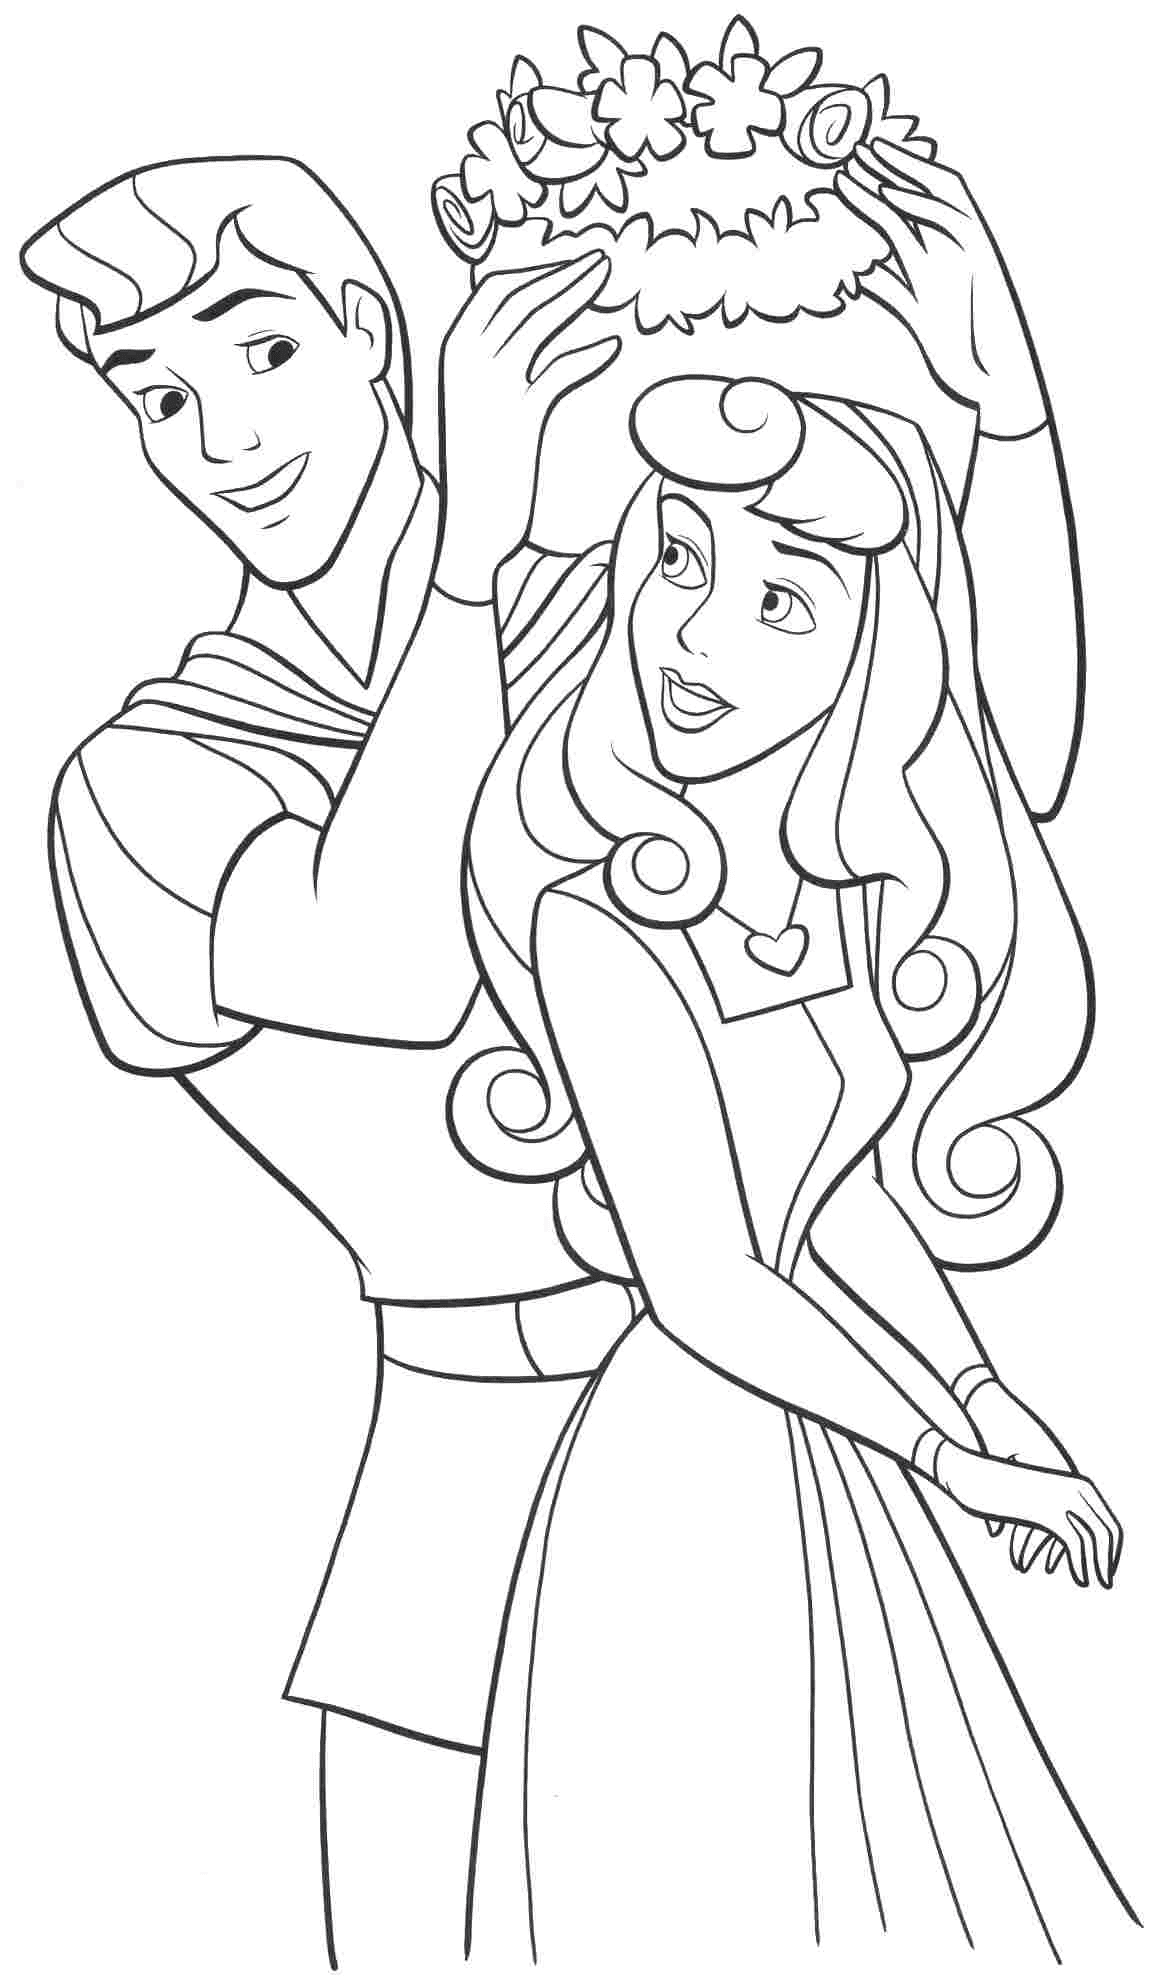 Phillip Wears a Wreath of Flowers on Aurora’s Head Coloring Page